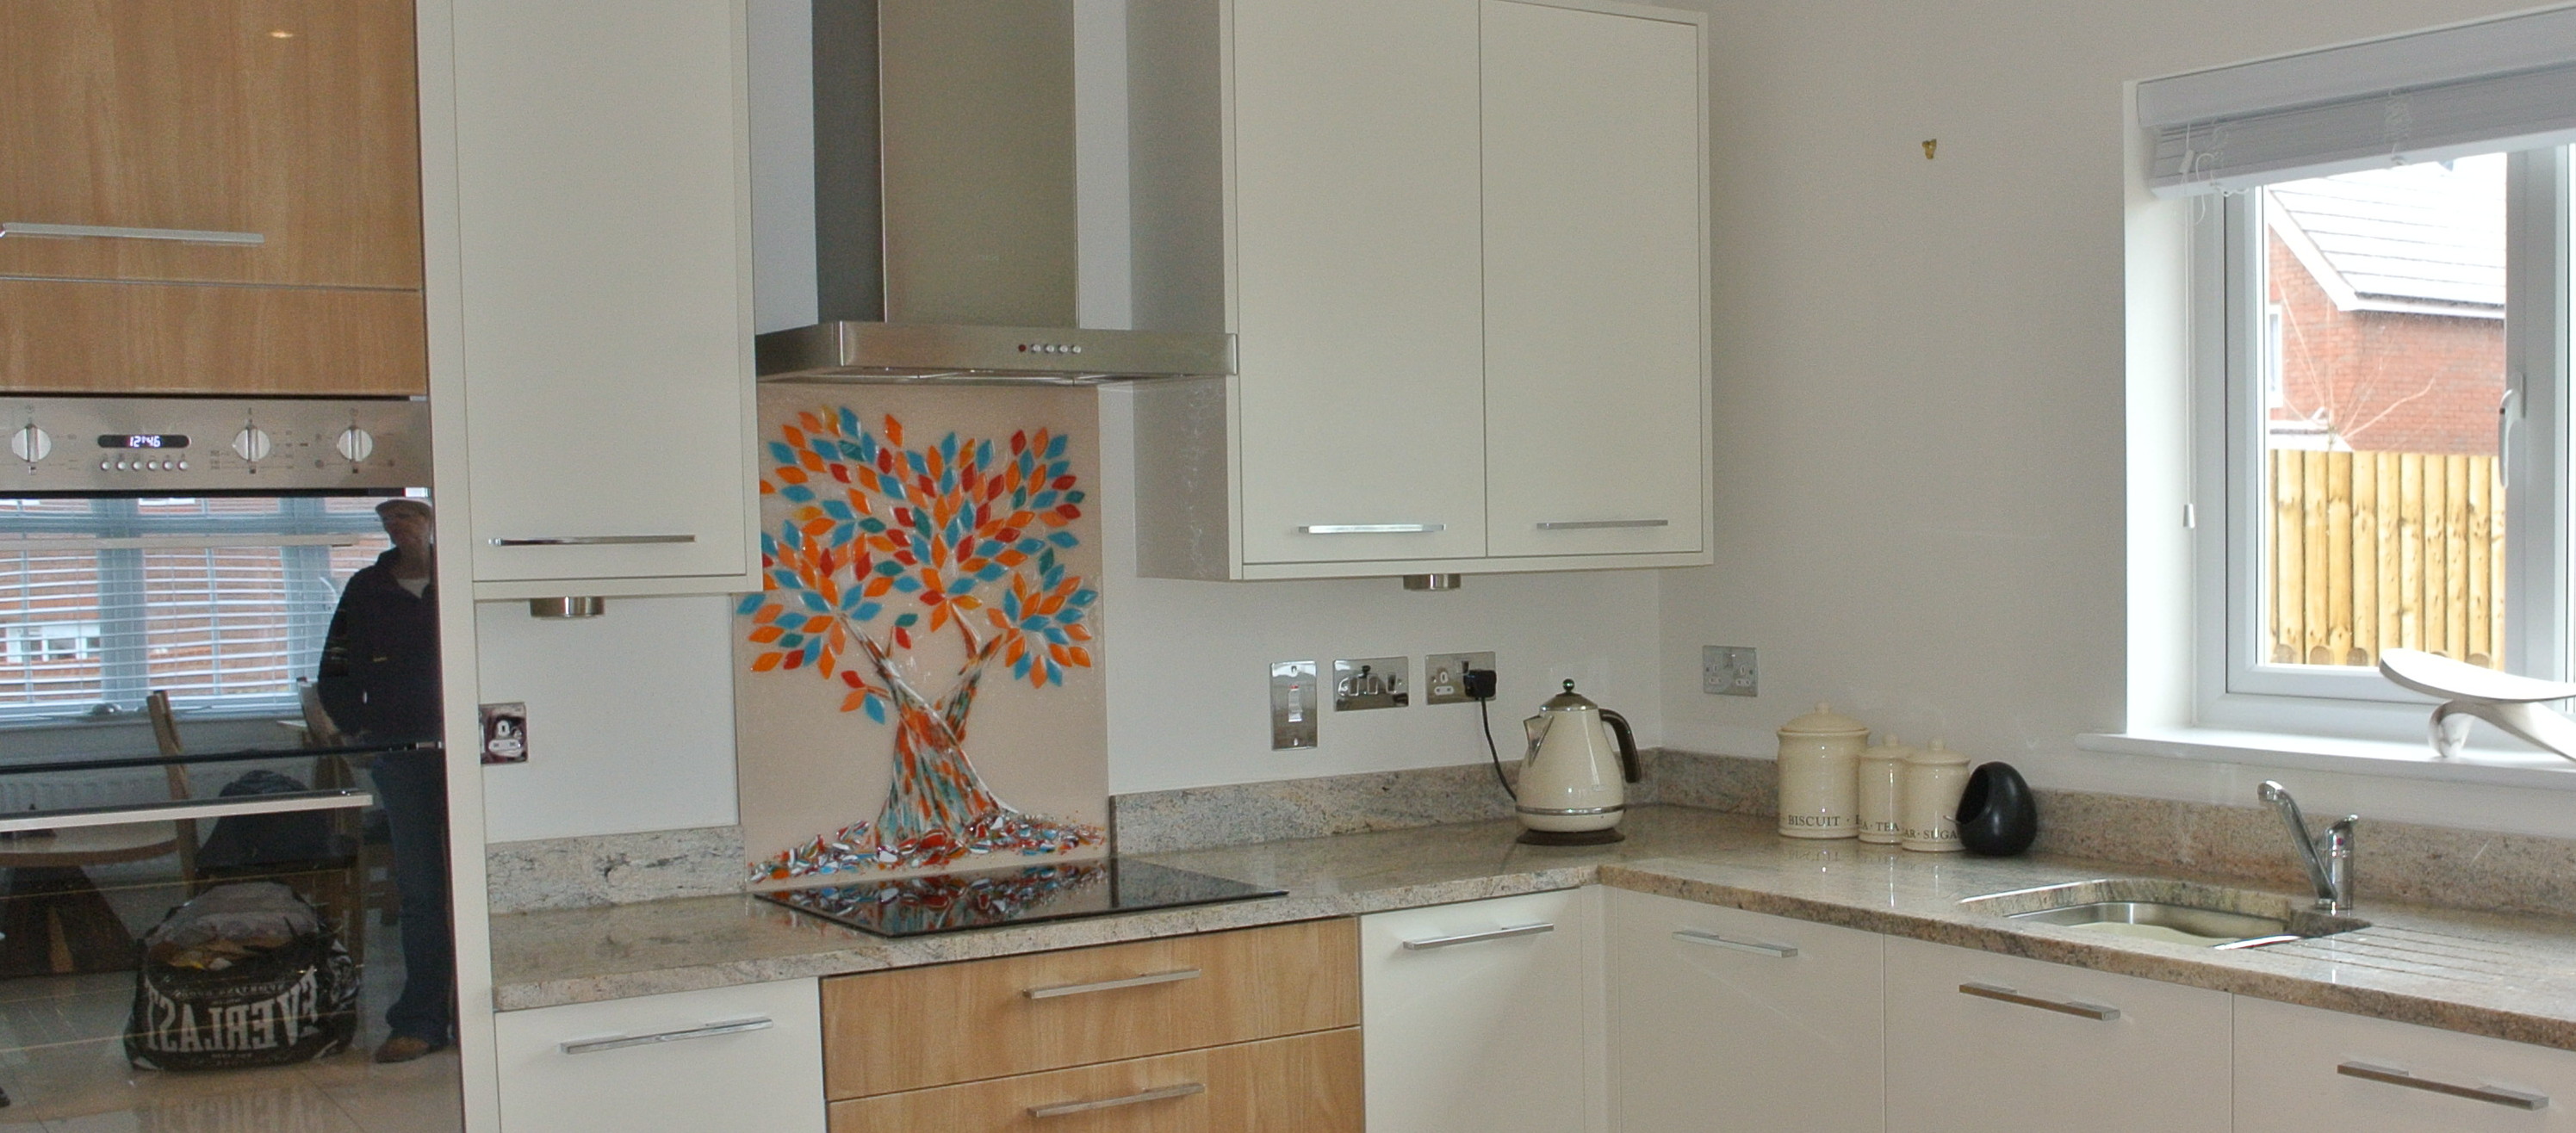 Bespoke, hand made Tree of Life glass splashback in turquoise and orange in a white kitchen